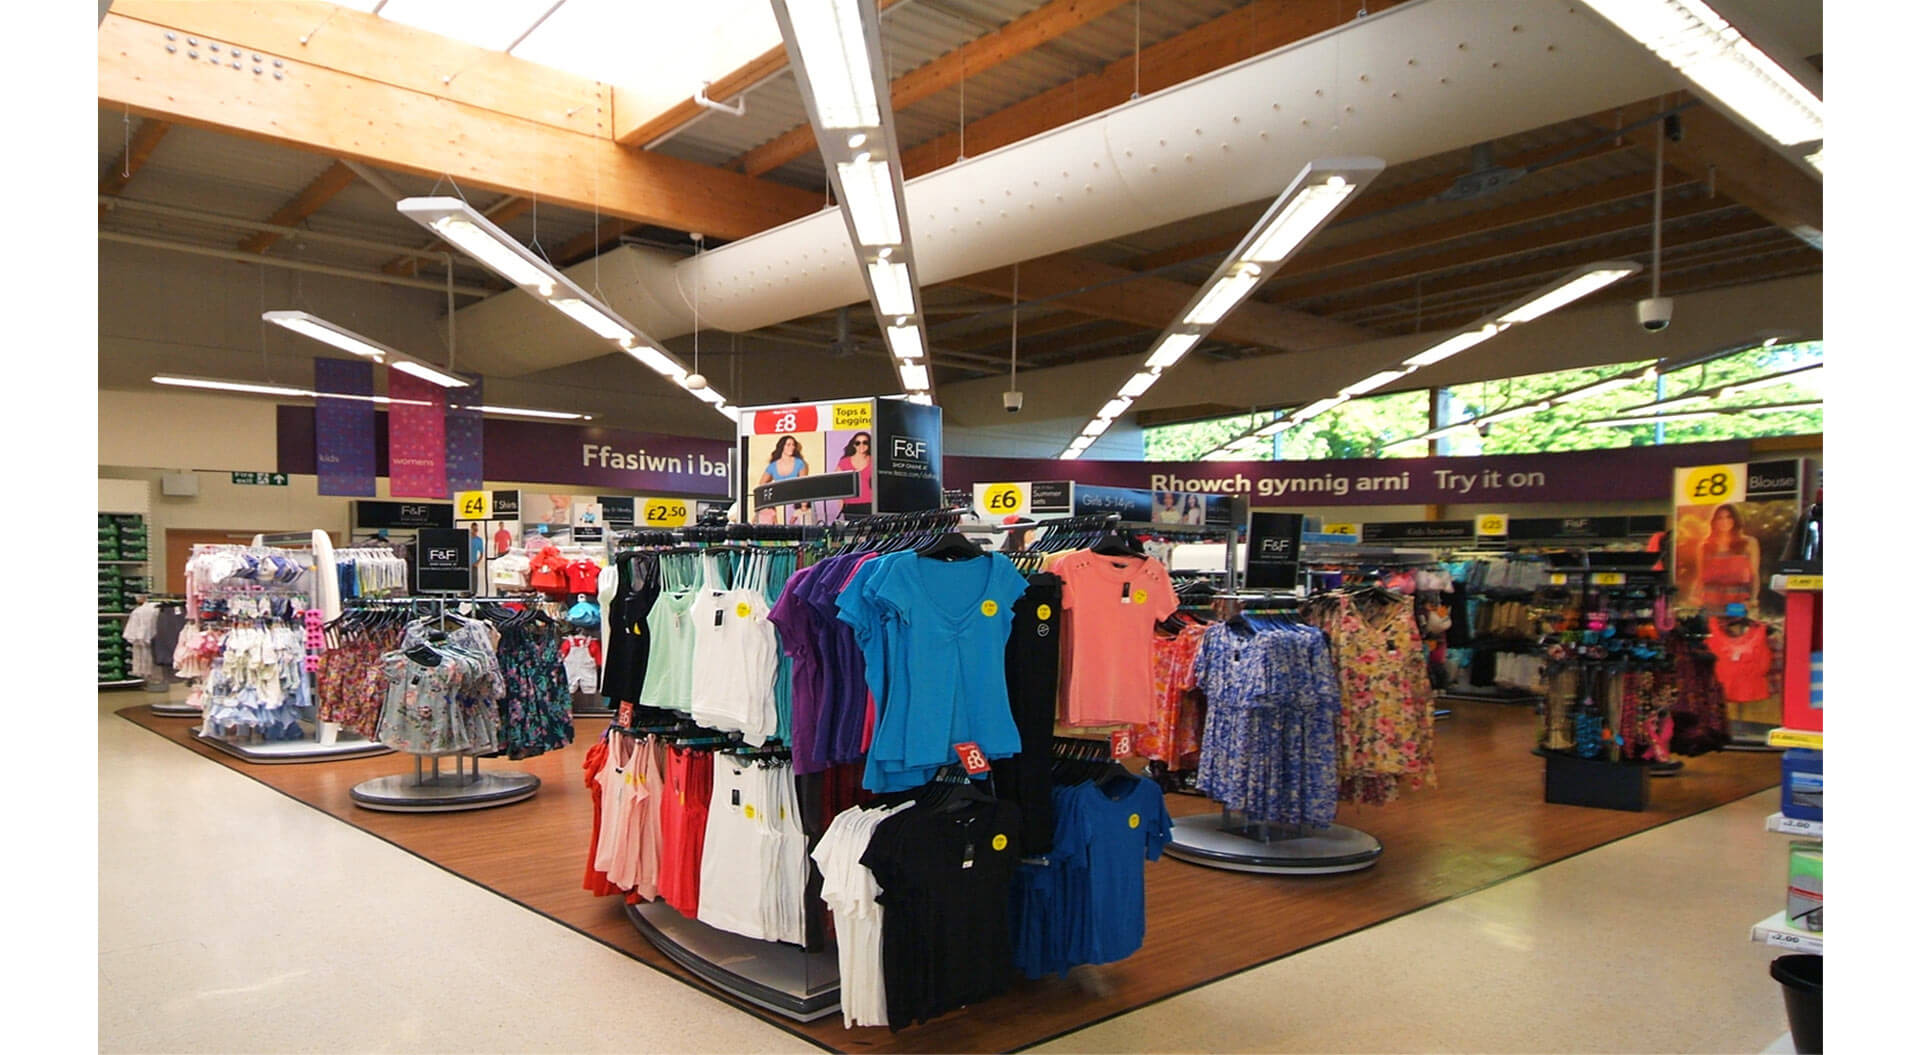  Florence and Fred Tesco fashion Welshpool retail store interior design, rebrand merchandising, lighting system and communications